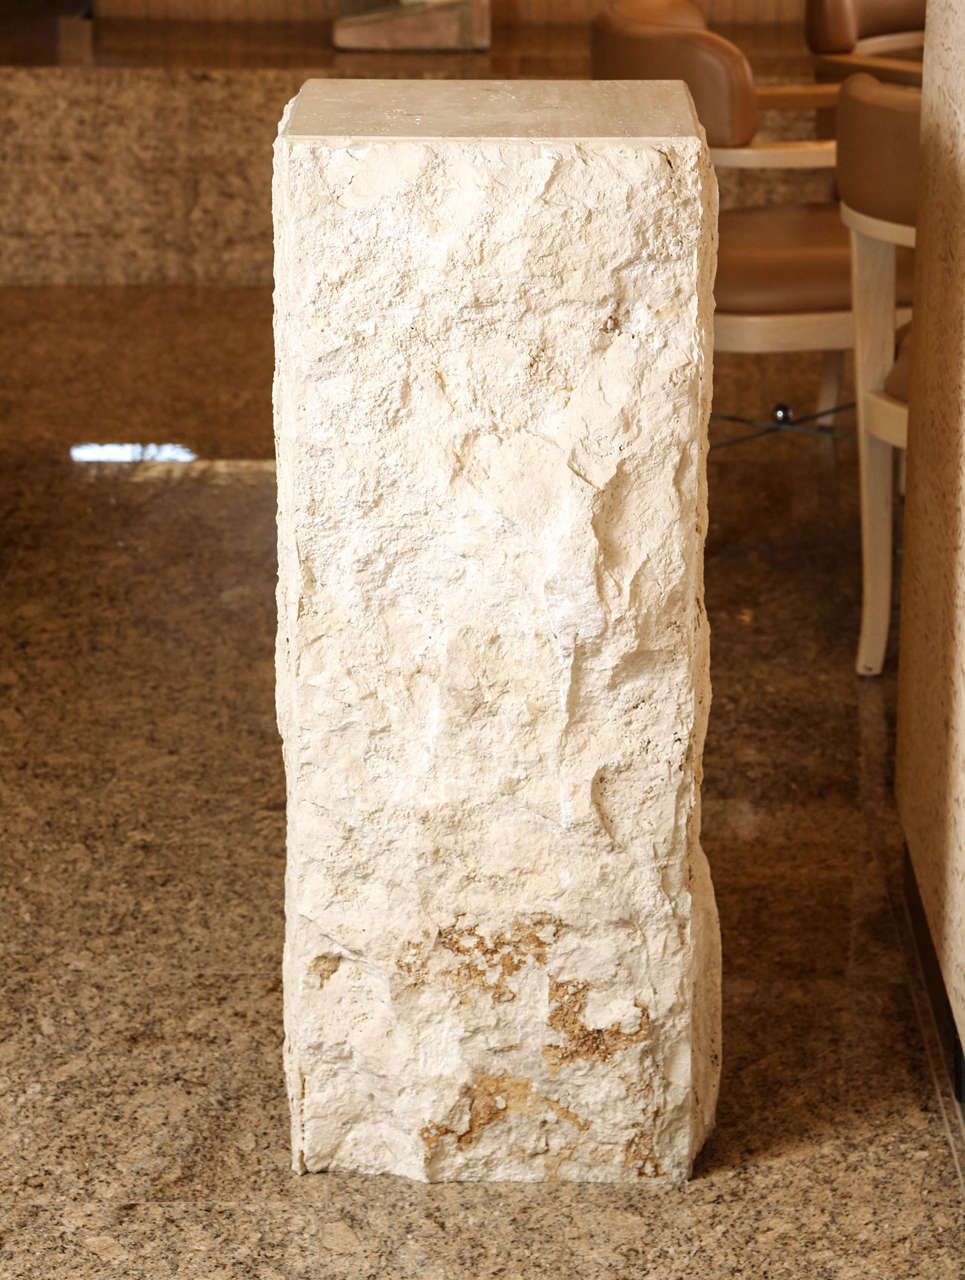 Large rough-hewn travertine pedestals by Steve Chase.
The tops of the pedestals are polished travertine and they are being sold individually.
The largest pedestal height is 40